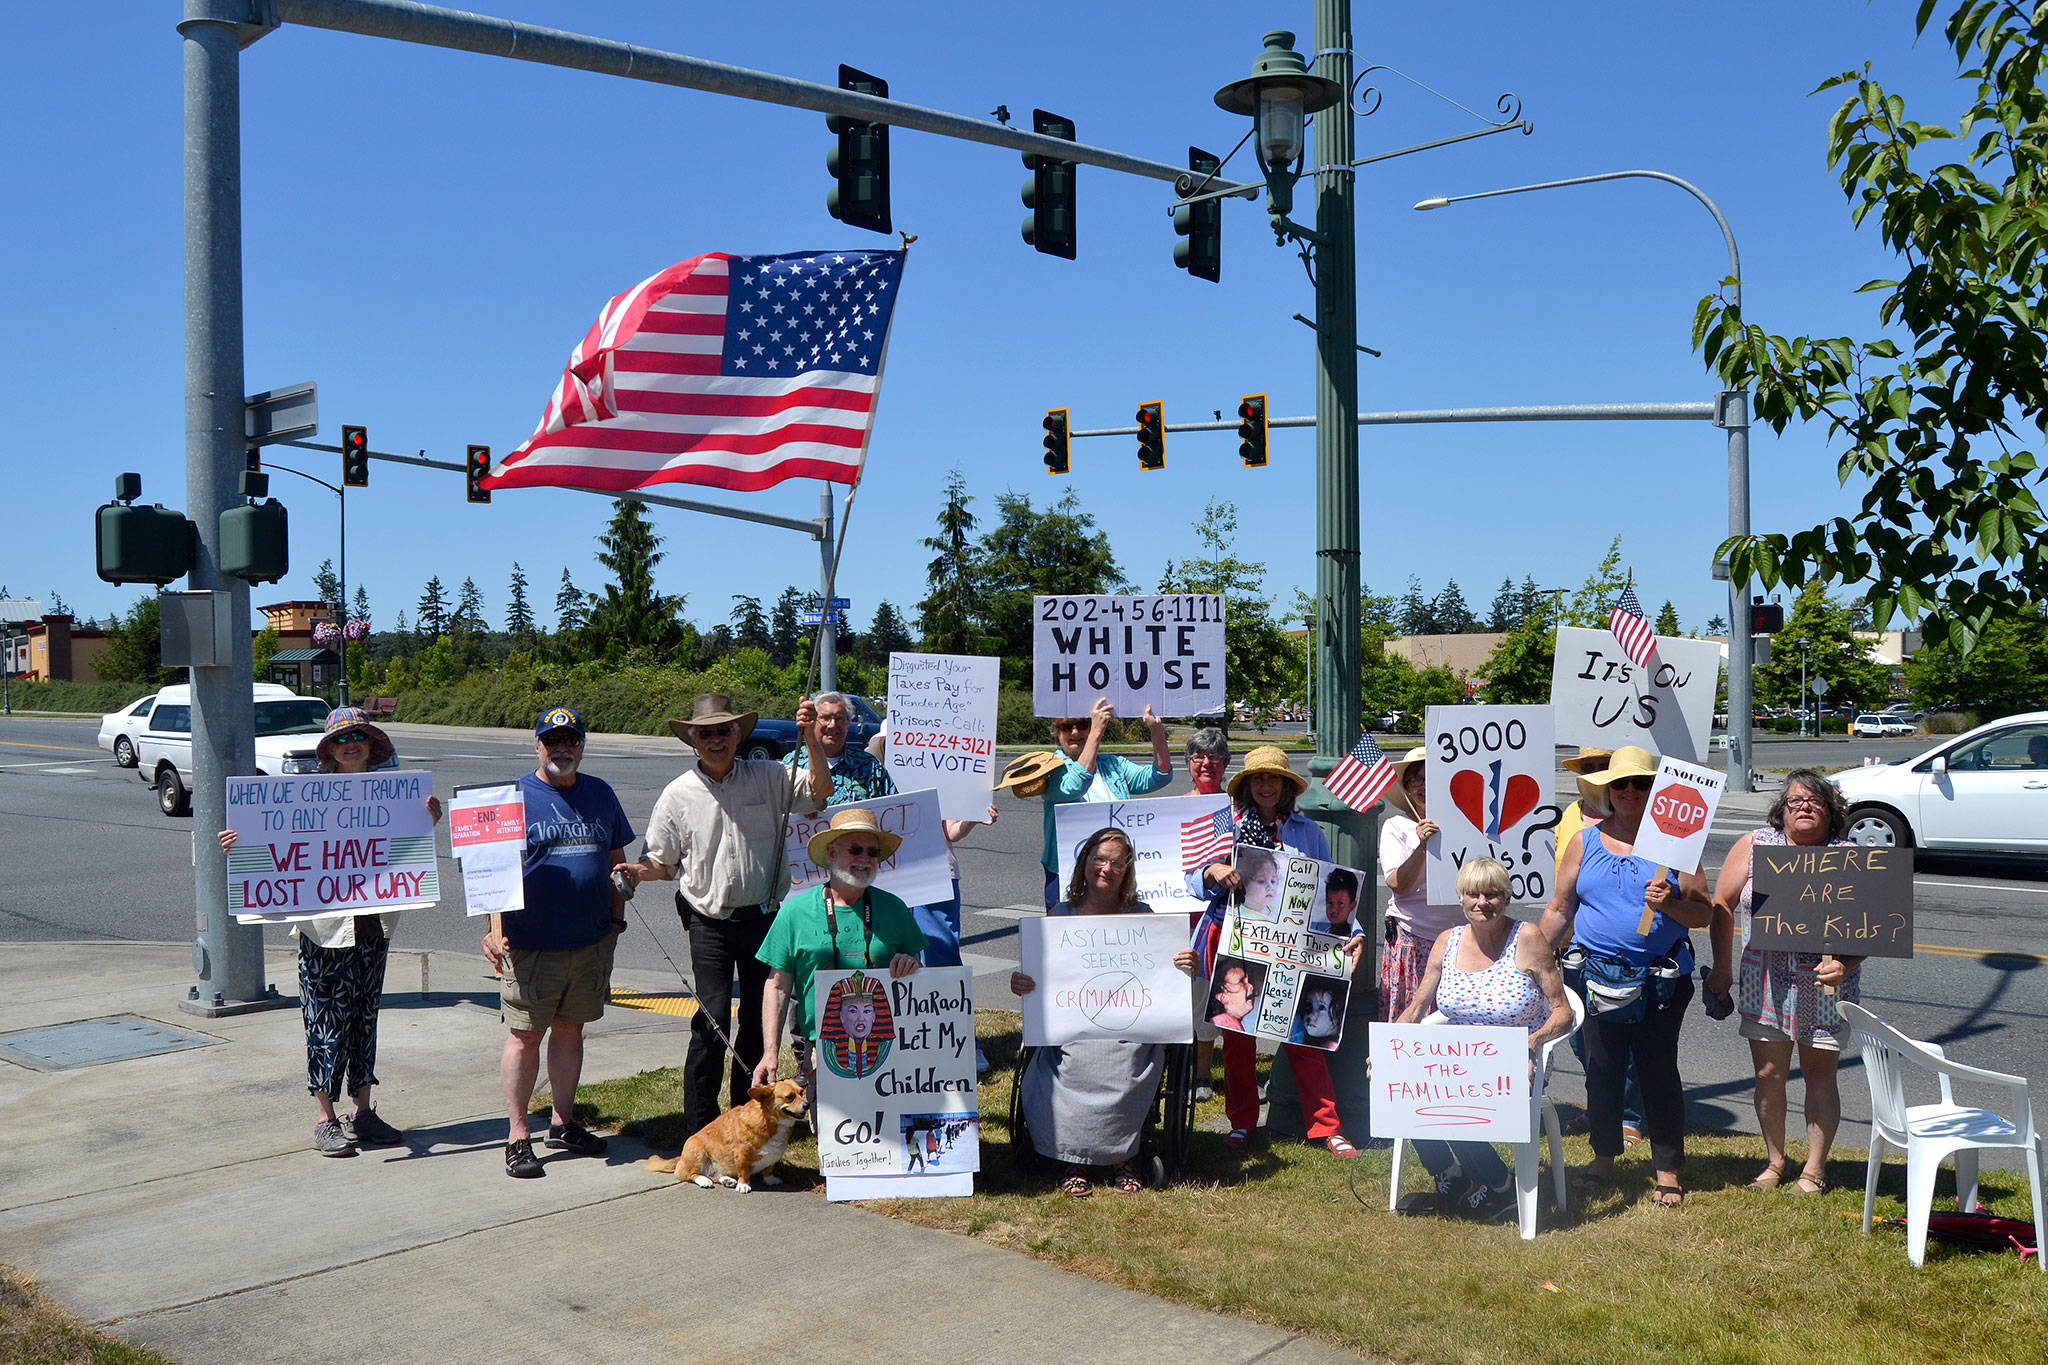 Community members gather July 15 for the fourth Sunday asking government officials to reunite all migrant children with their families separated at the US/Mexico border. Sequim Gazette photo by Matthew Nash